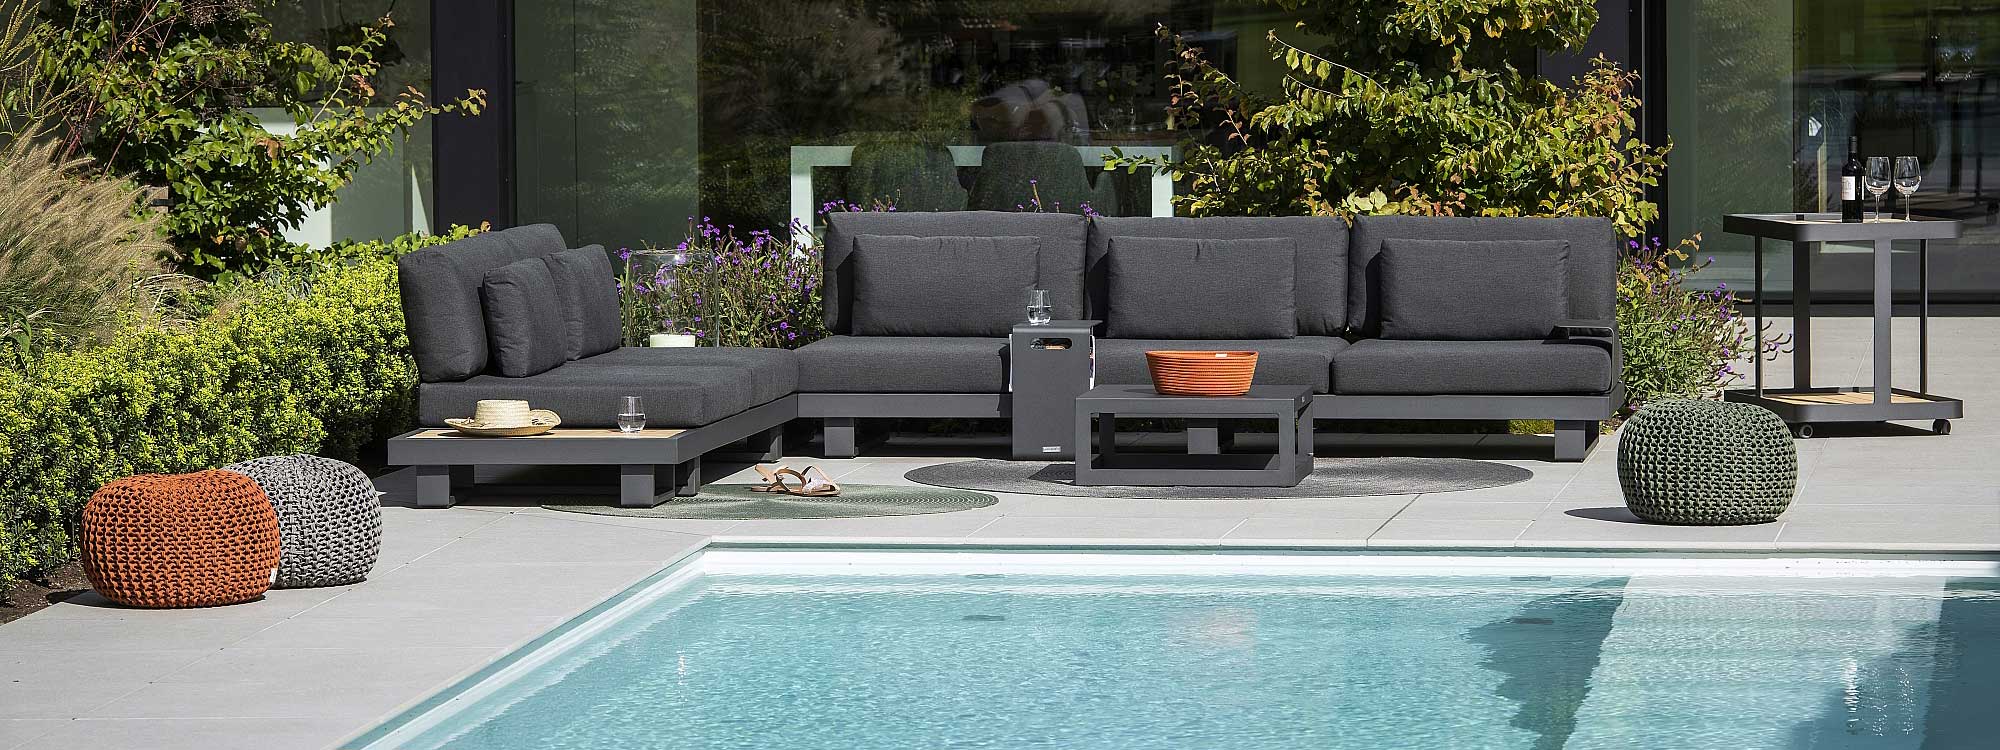 Fano outdoor lounge set & modern garden sofas are made in durable garden furniture materials by Jati & Kebon chic exterior furniture company.